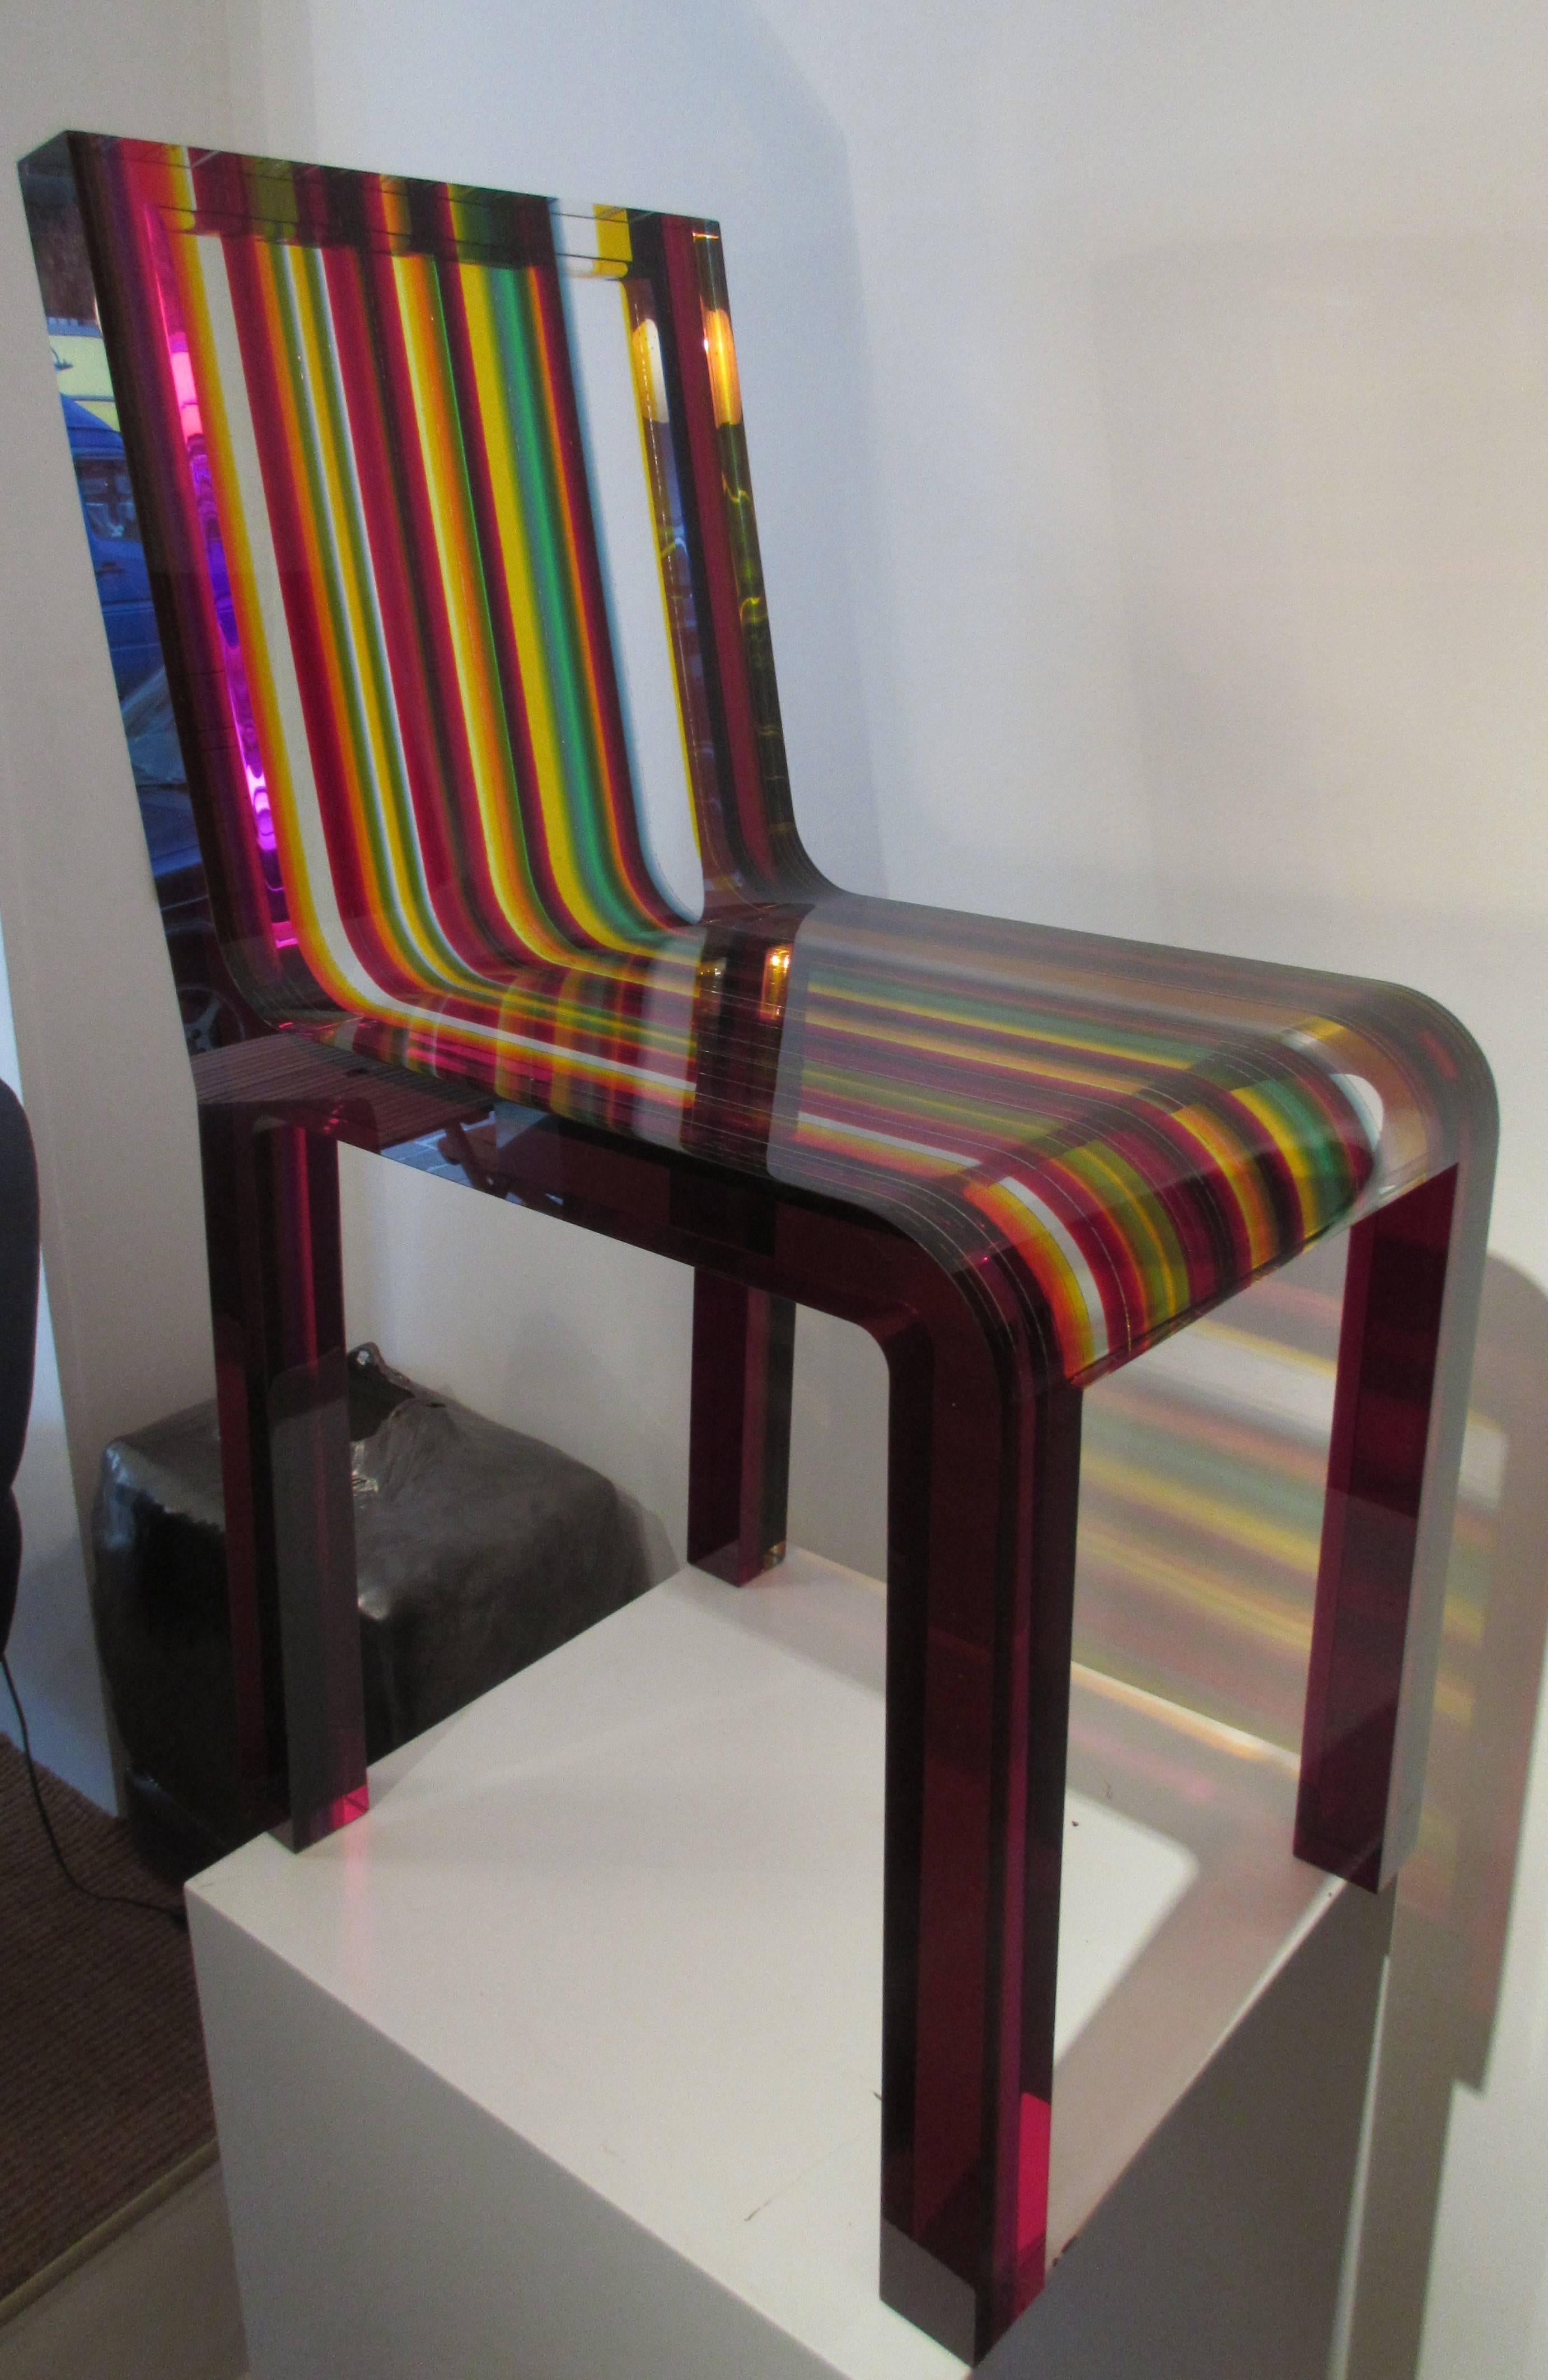 Rainbow chair by Patrick Norguet for Cappellini.
Rainbow chair by the French designer Patrick Norguet. Chair entirely manufactured in acrylic resin, made of plates of different color and thickness joined by ultrasounds.

(Manufacturer